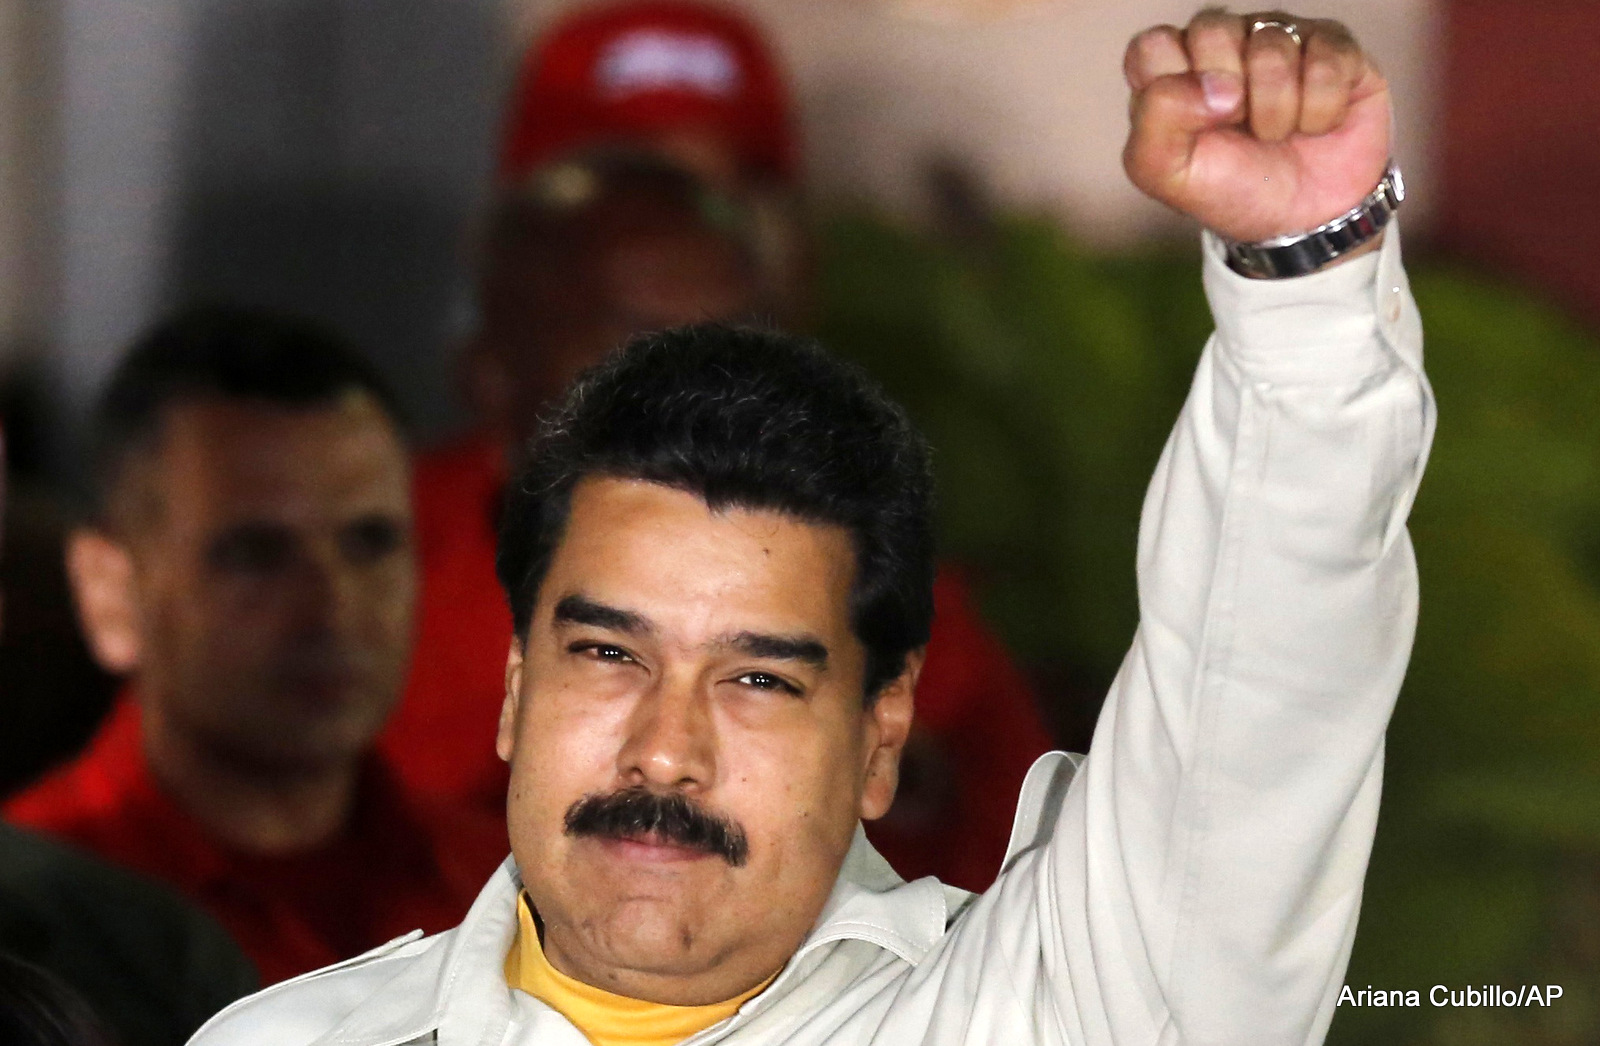 Venezuela's President Nicolas Maduro holds up a clenched fist as he greets supporters during an event at Miraflores presidential palace in Caracas, Venezuela. In a fiery speech late Monday, March 9, 2015.